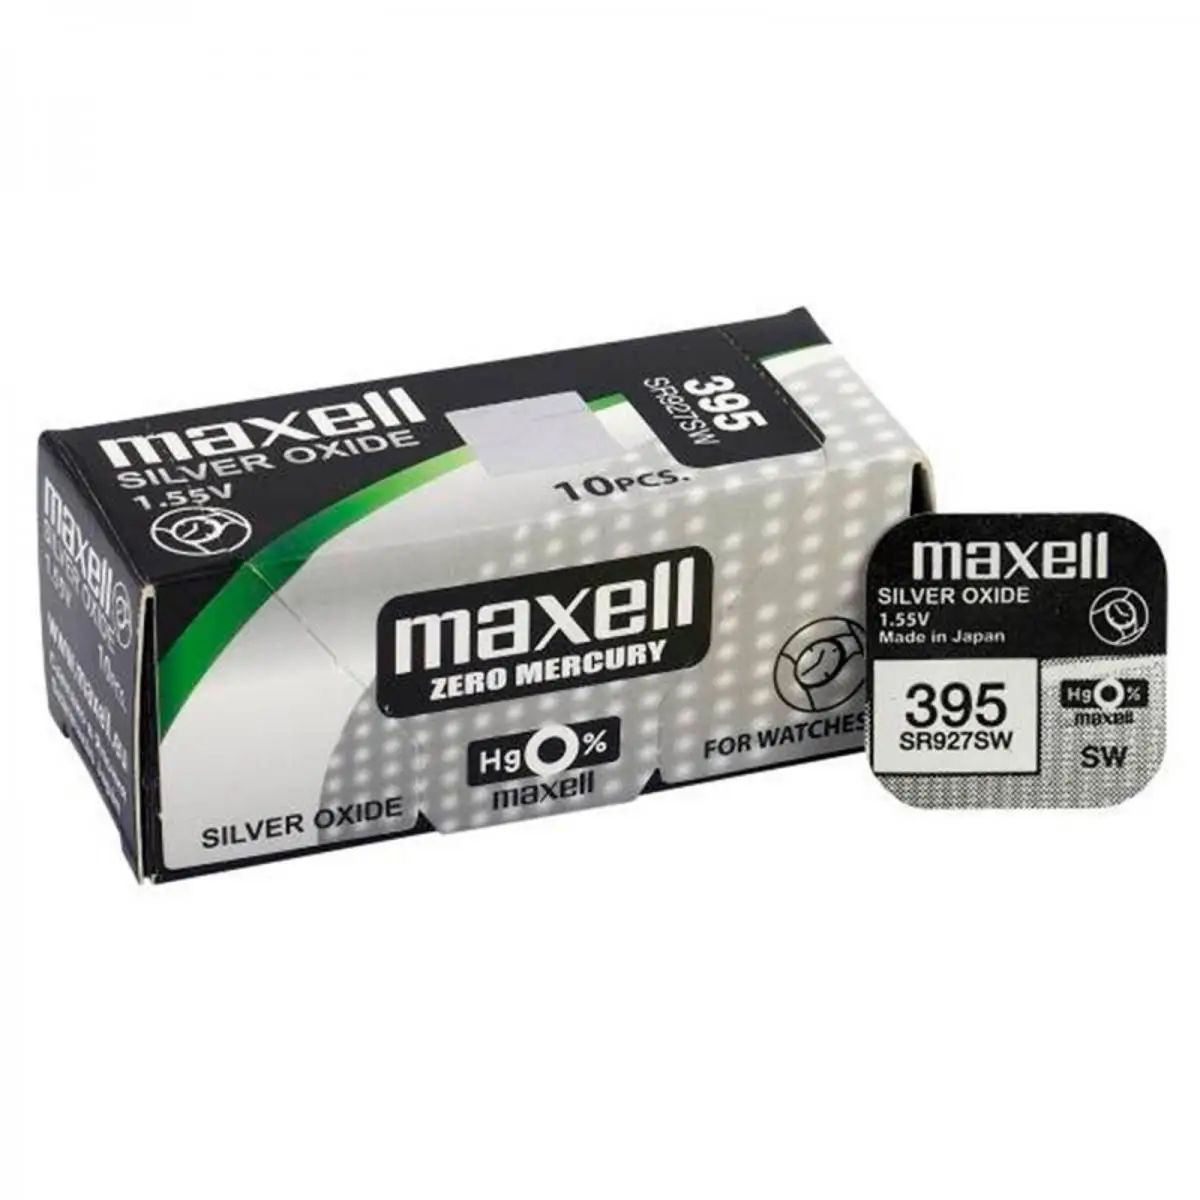 

Boton Maxell batteries original battery silver oxide SR927SW blister 2X Uds